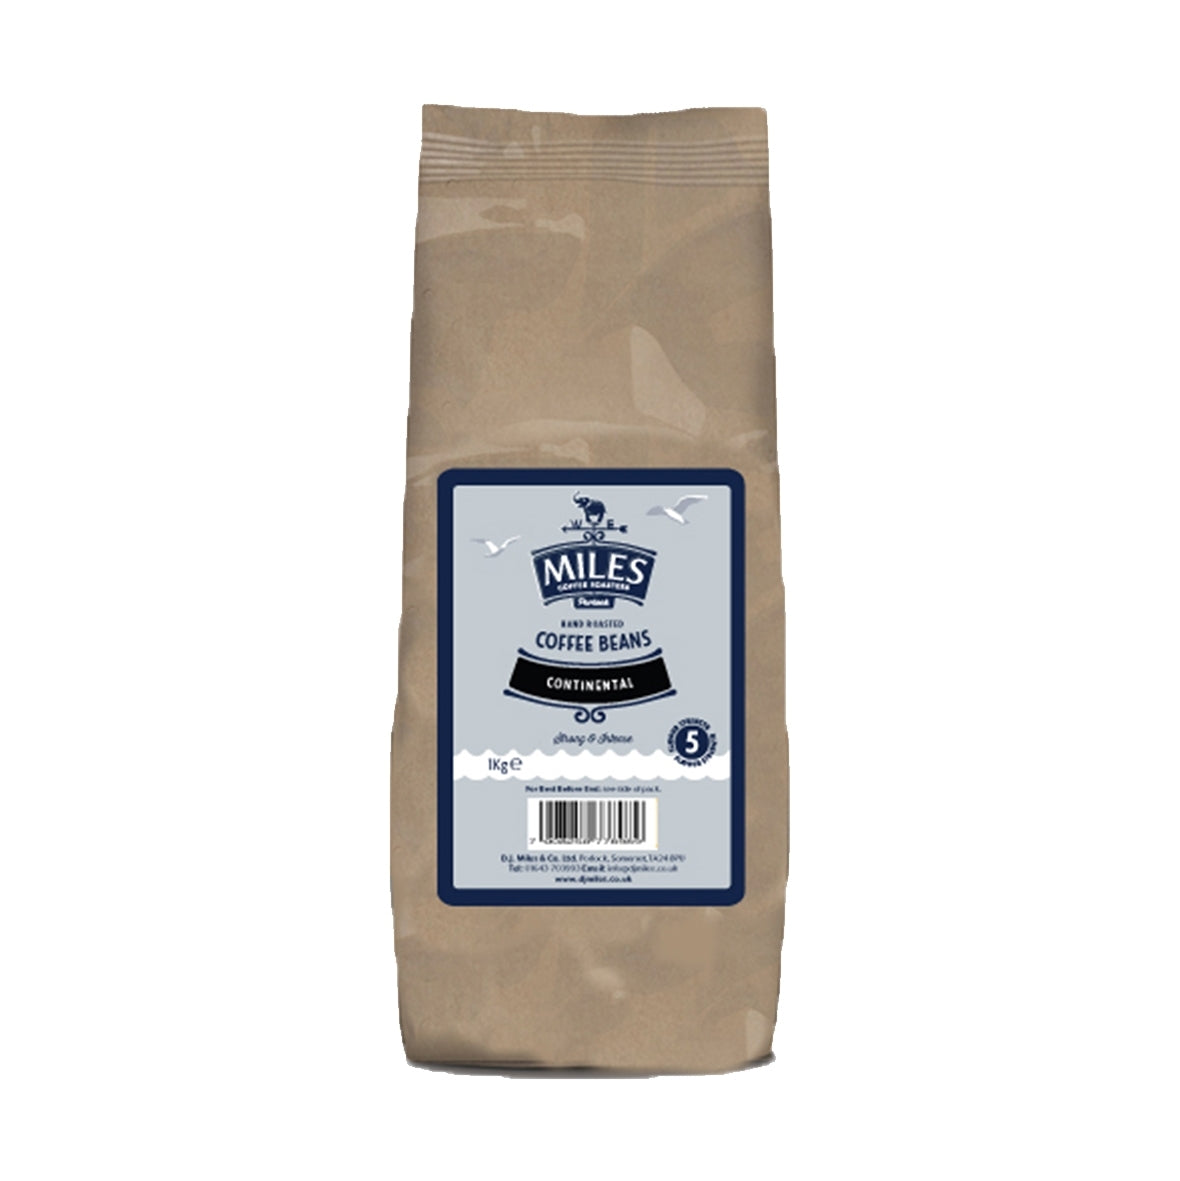 MILES CONTINENTAL COFFEE BEANS x1kg